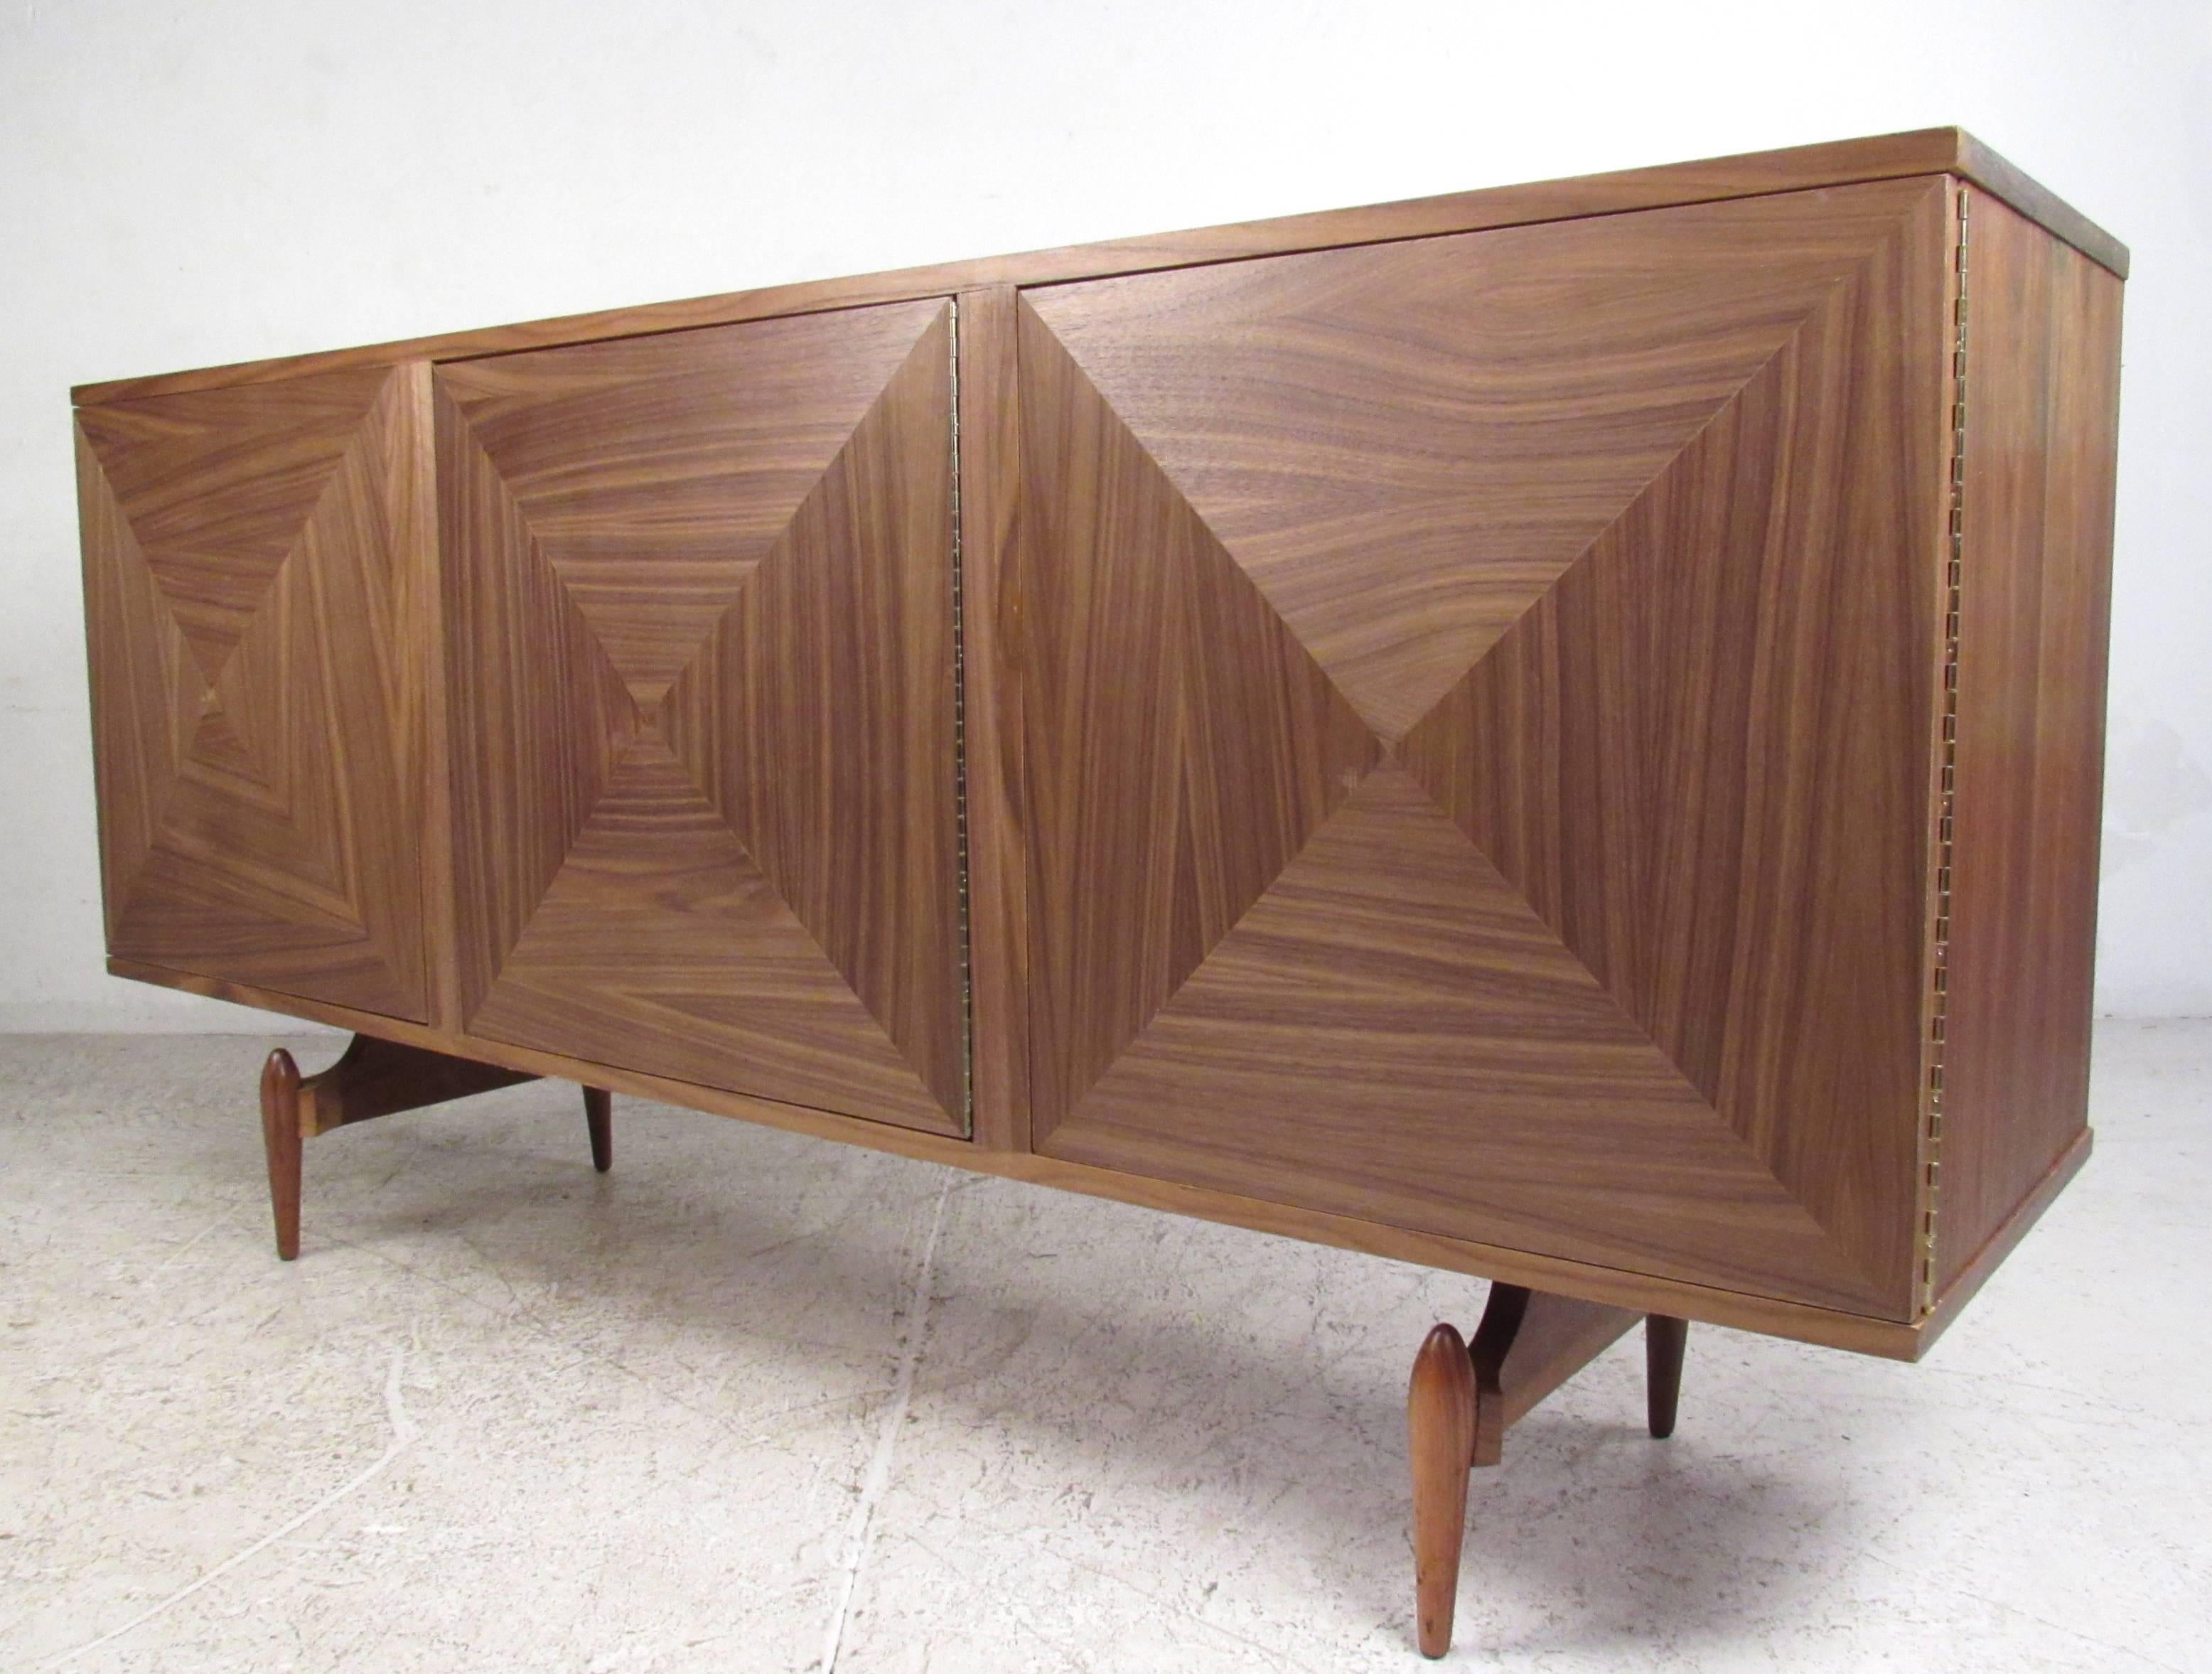 This Mid-Century style storage credenza features three spacious interior cabinets with fittings for adjustable shelves. Stylish sculpted front natural finish cabinet doors are wonderfully accented by vintage tapered legs on base. Please confirm item